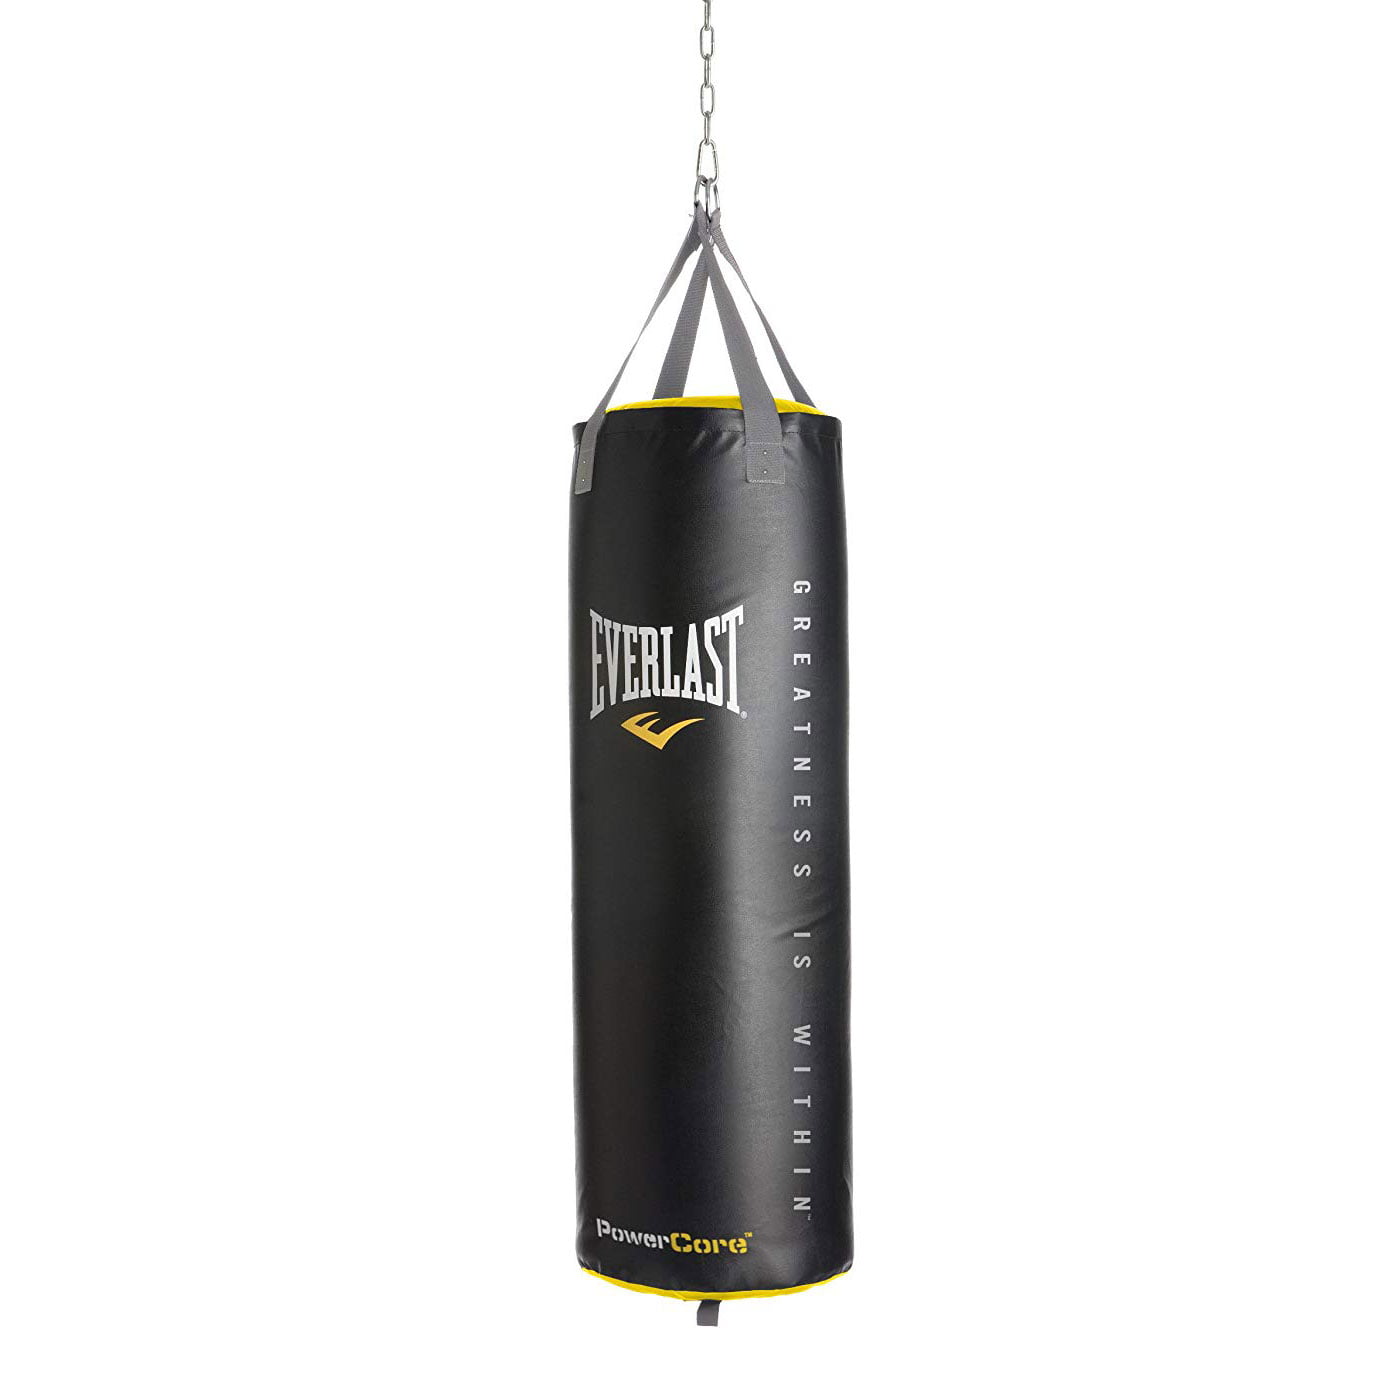 Black Everlast HydroStrike 100 Pound Boxing Heavy Water Filled Punching Bag 